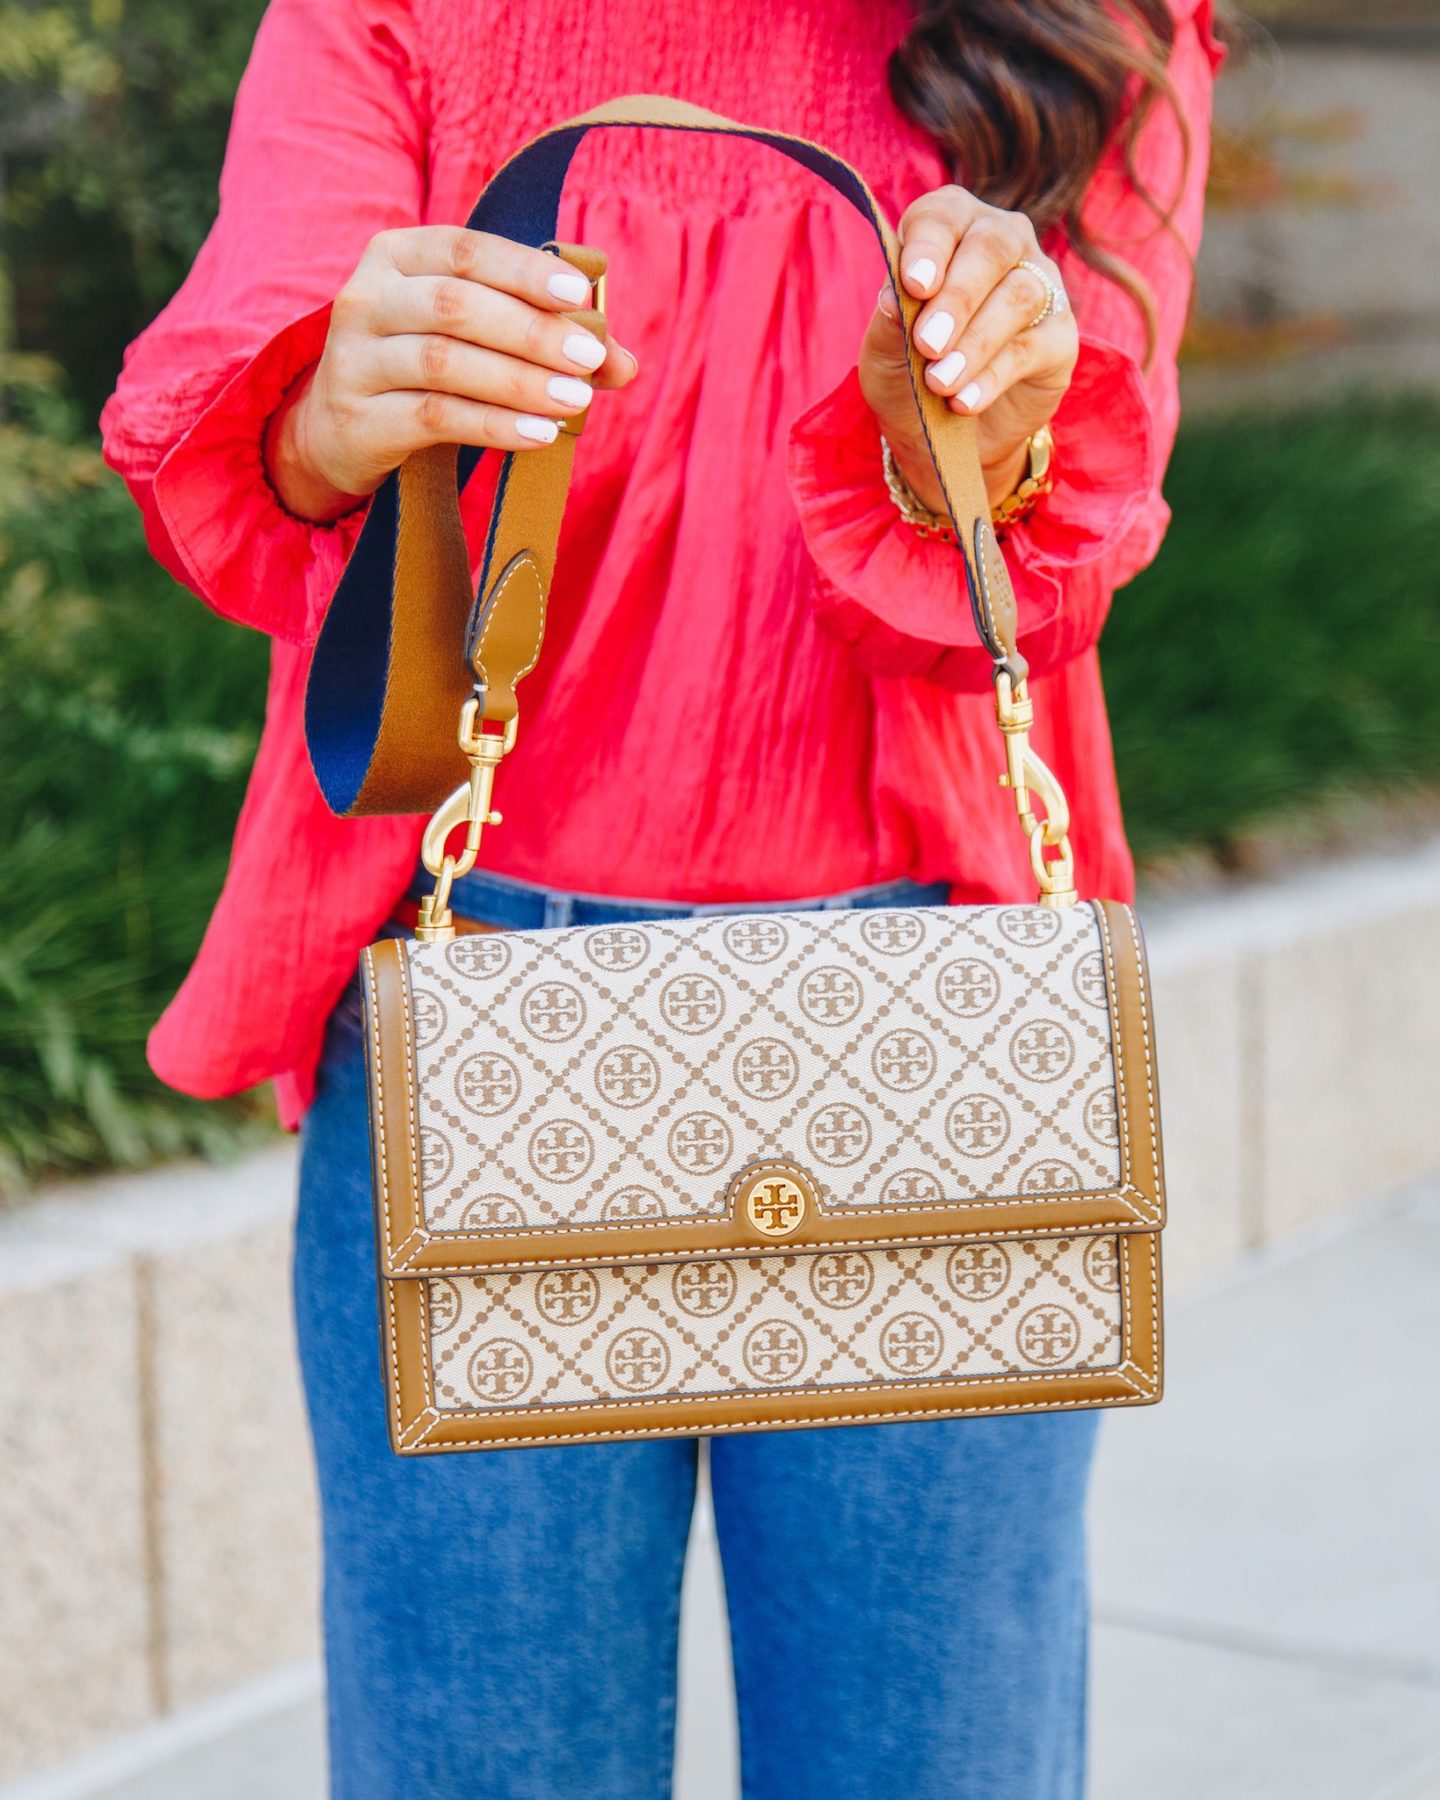 This Tory Burch Tote is Perfect for Spring